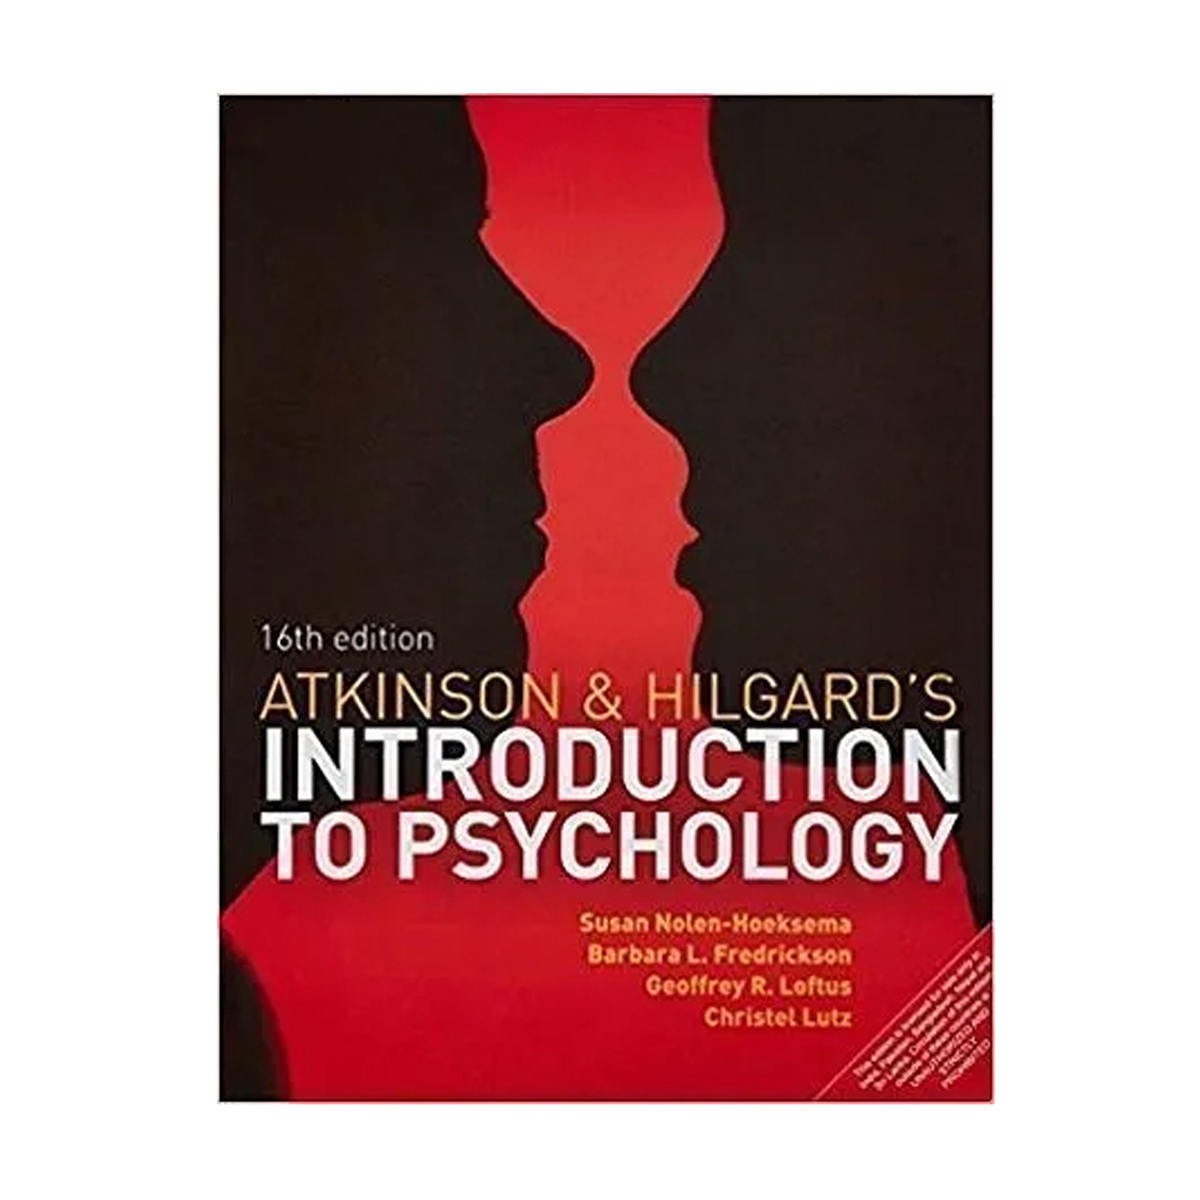 Atkinson and Hilgards Introduction to Psychology 16th Edition